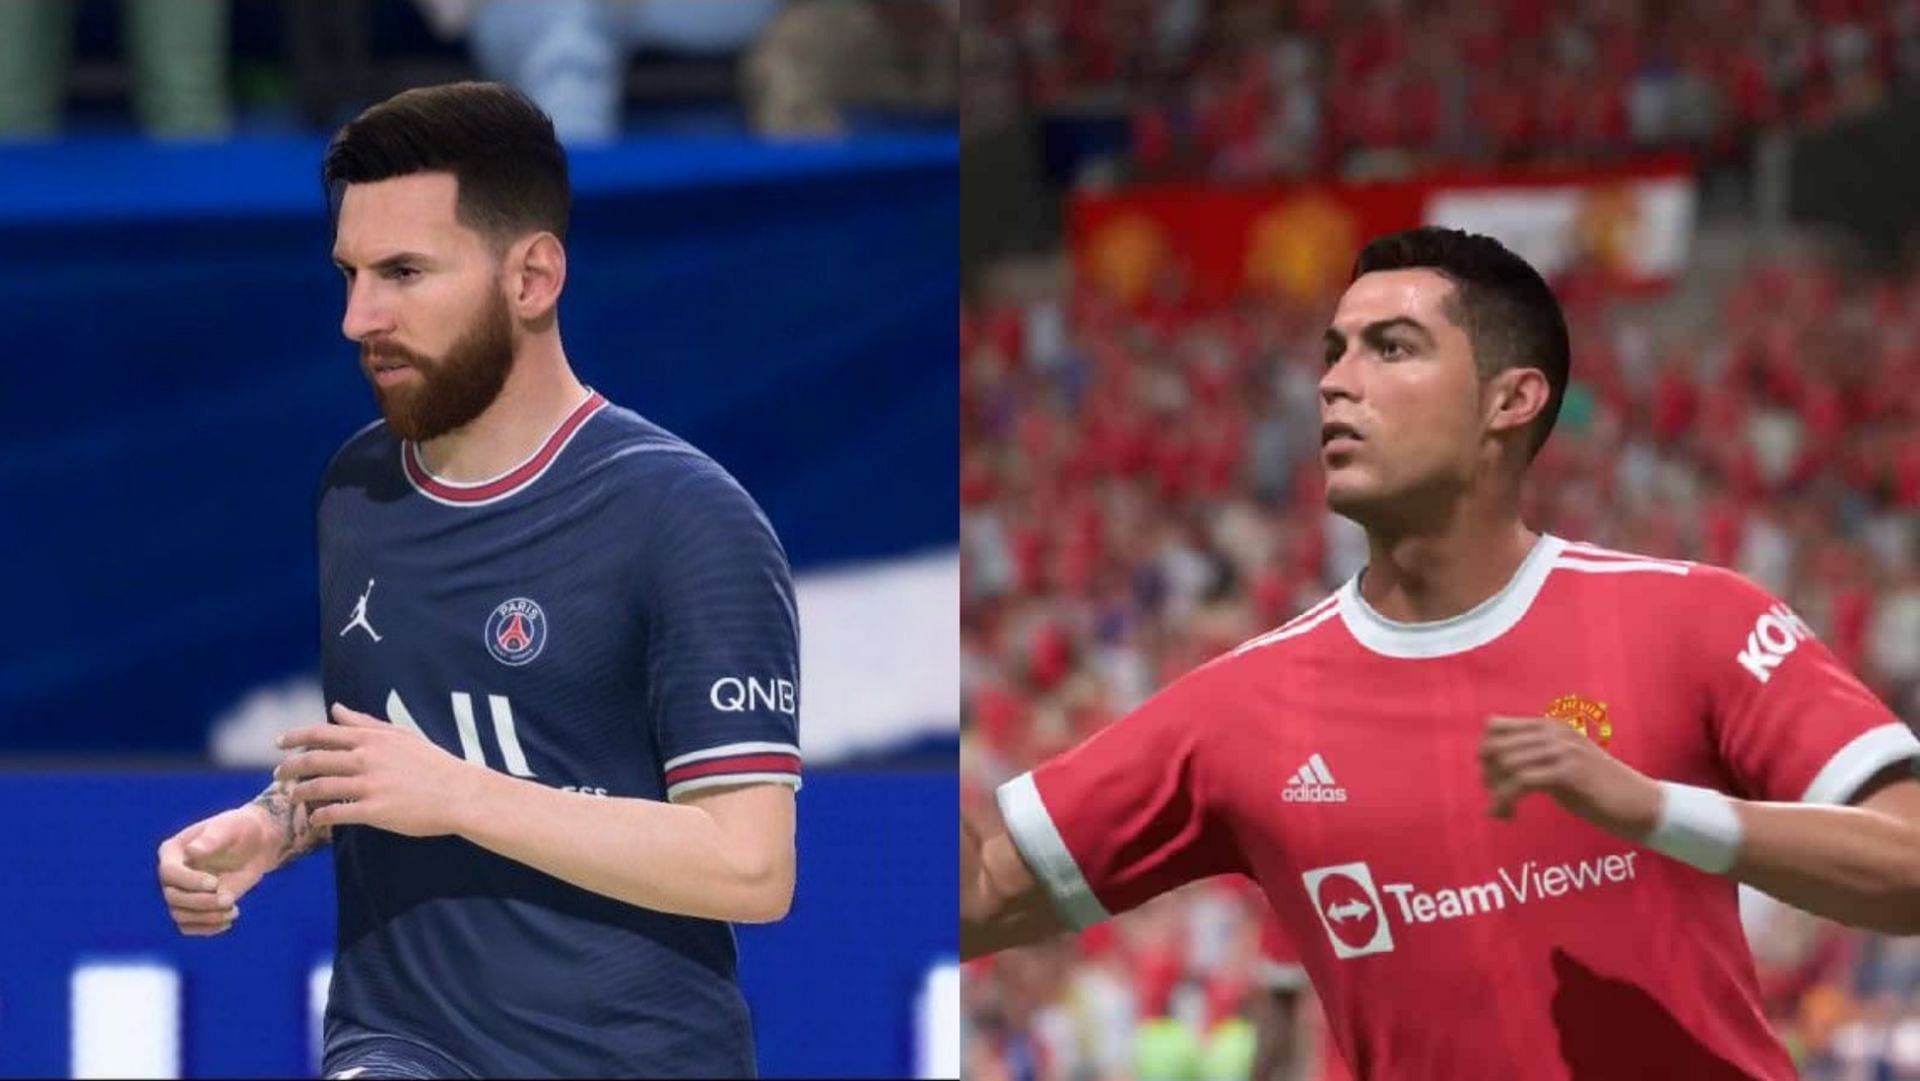 There has been much discussion about the overalls of the two superstars (Images via EA Sports)